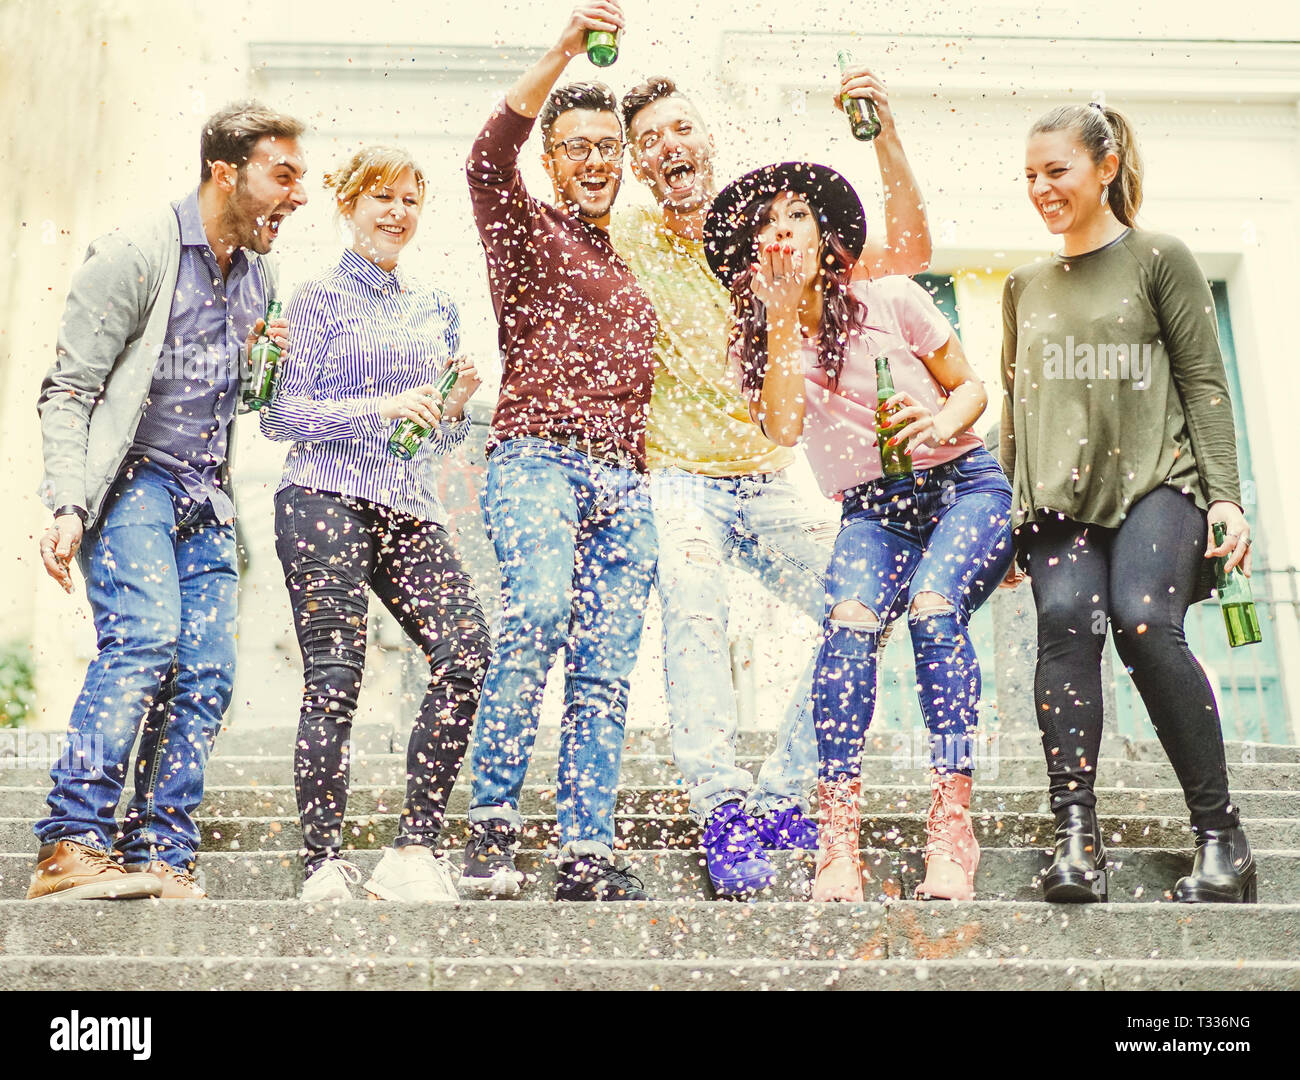 Group of happy friends having a street party drinking beers while confetti are falling down - Hilarious young people celebrating a birthday outdoor Stock Photo